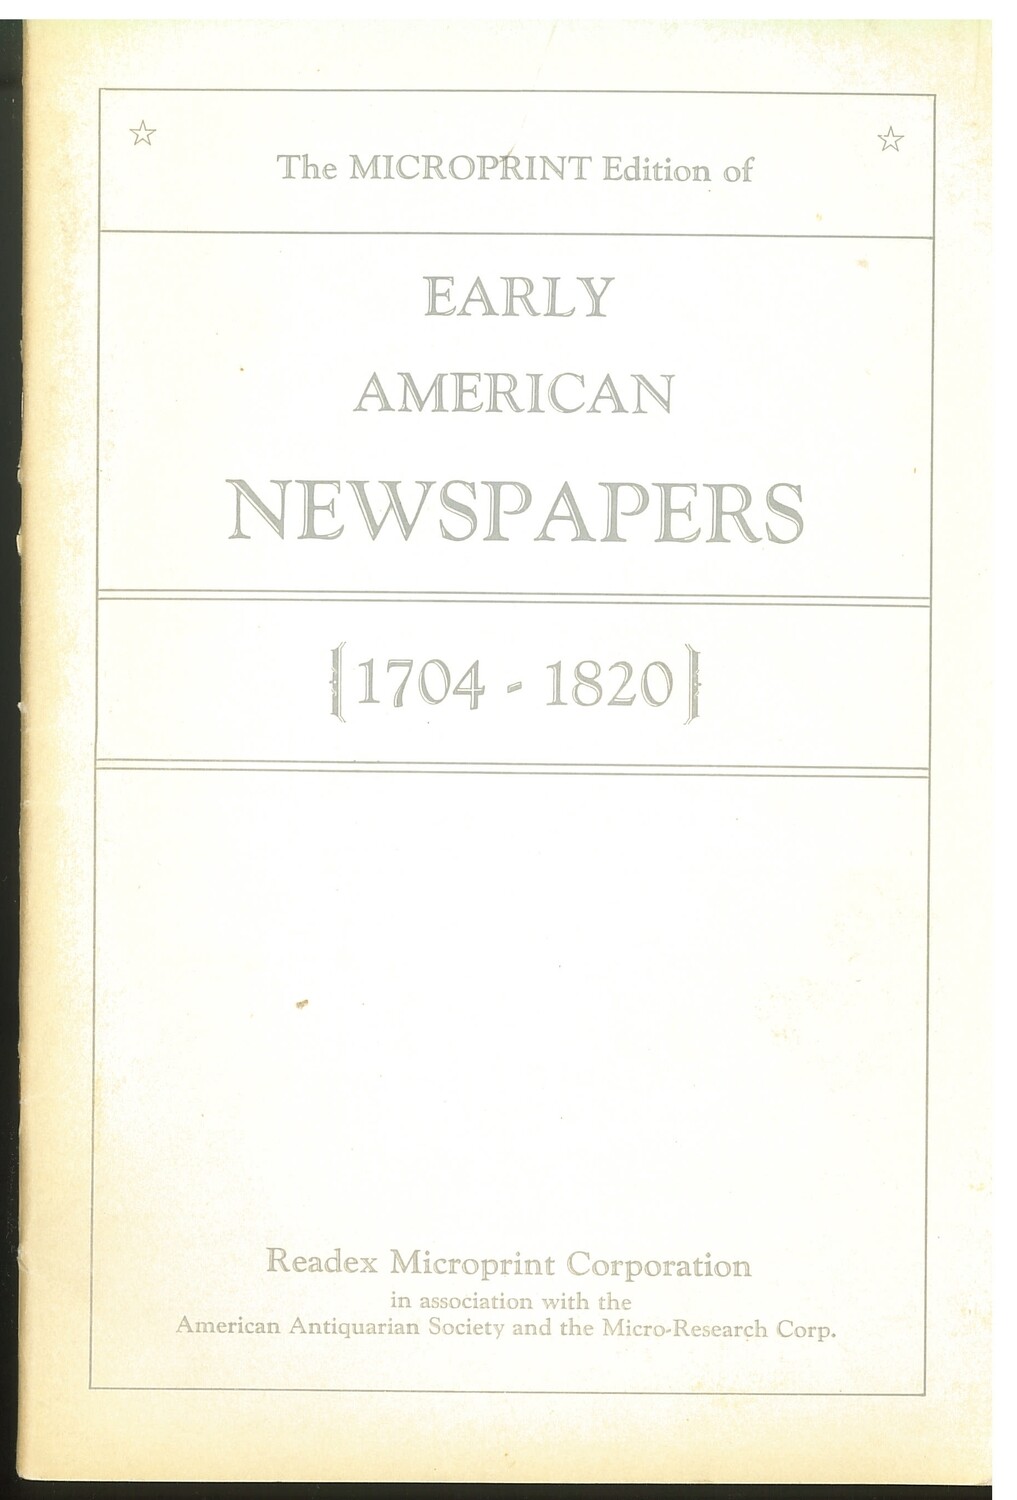 Early American Newspapers 1704-1820